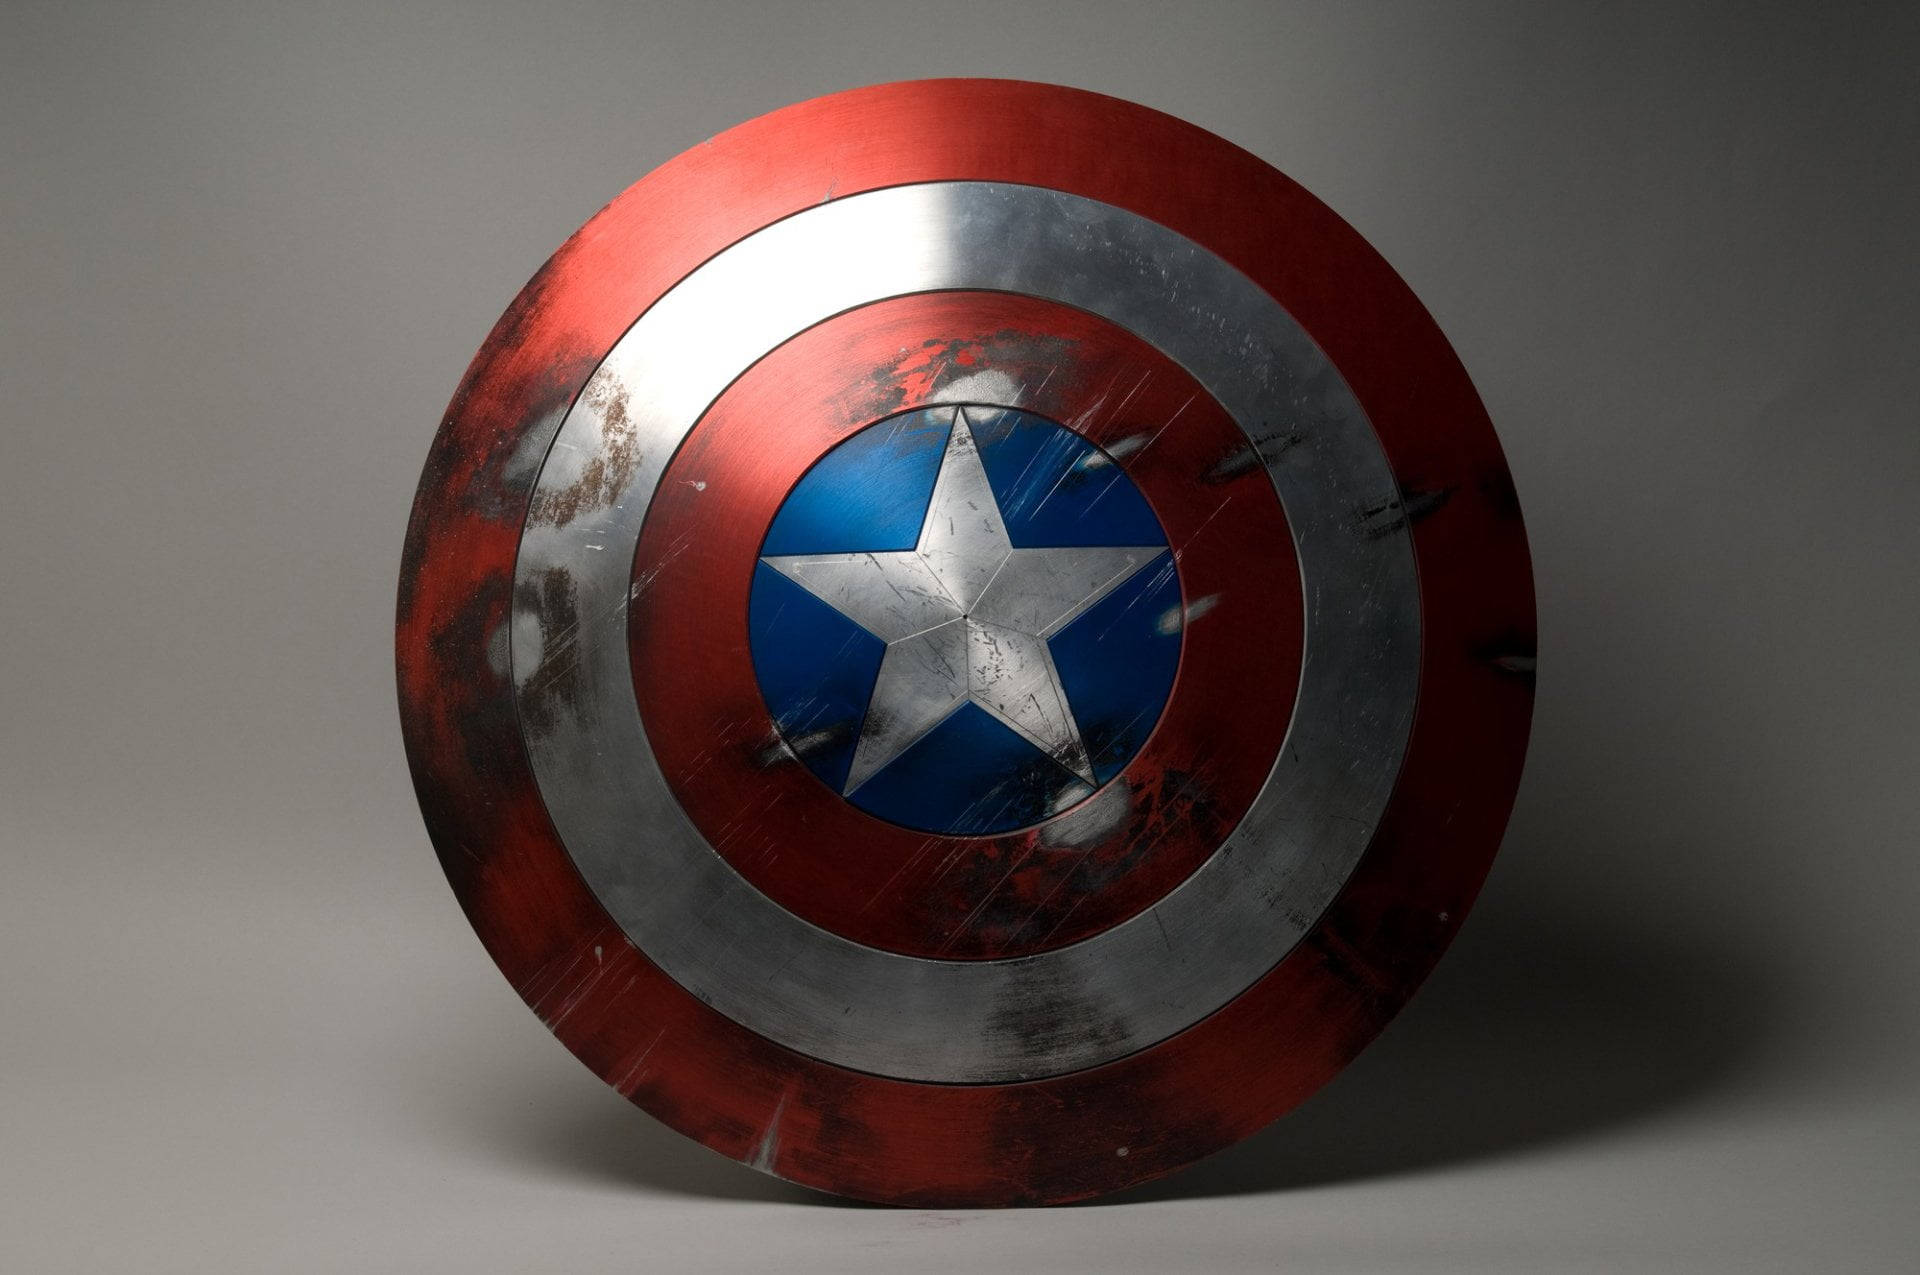 Captain America holding his iconic shield ready to take on the world Wallpaper